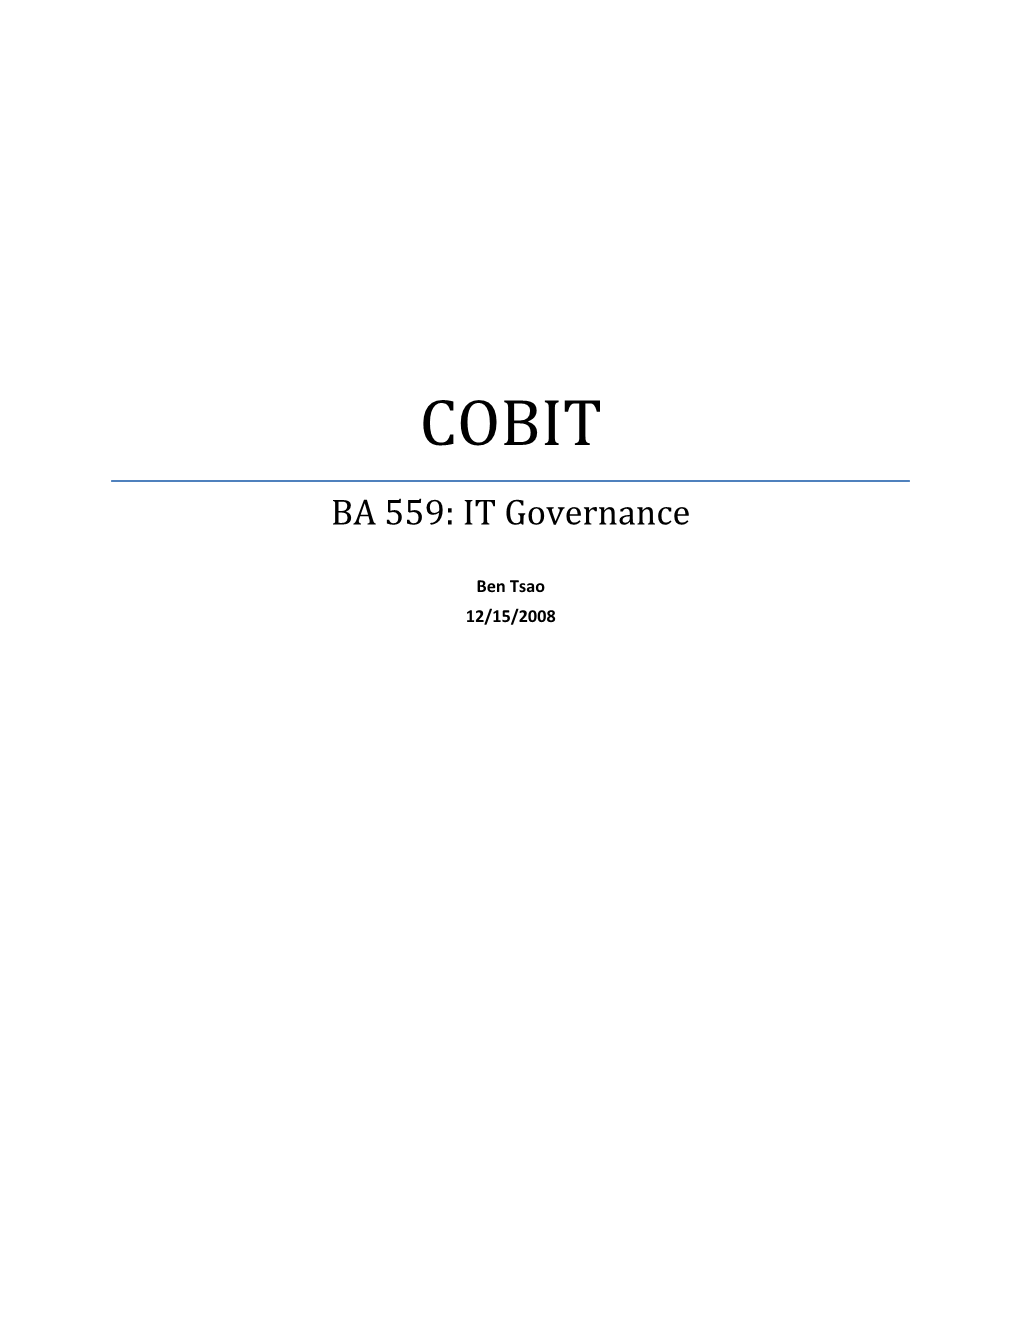 General Overview of COBIT